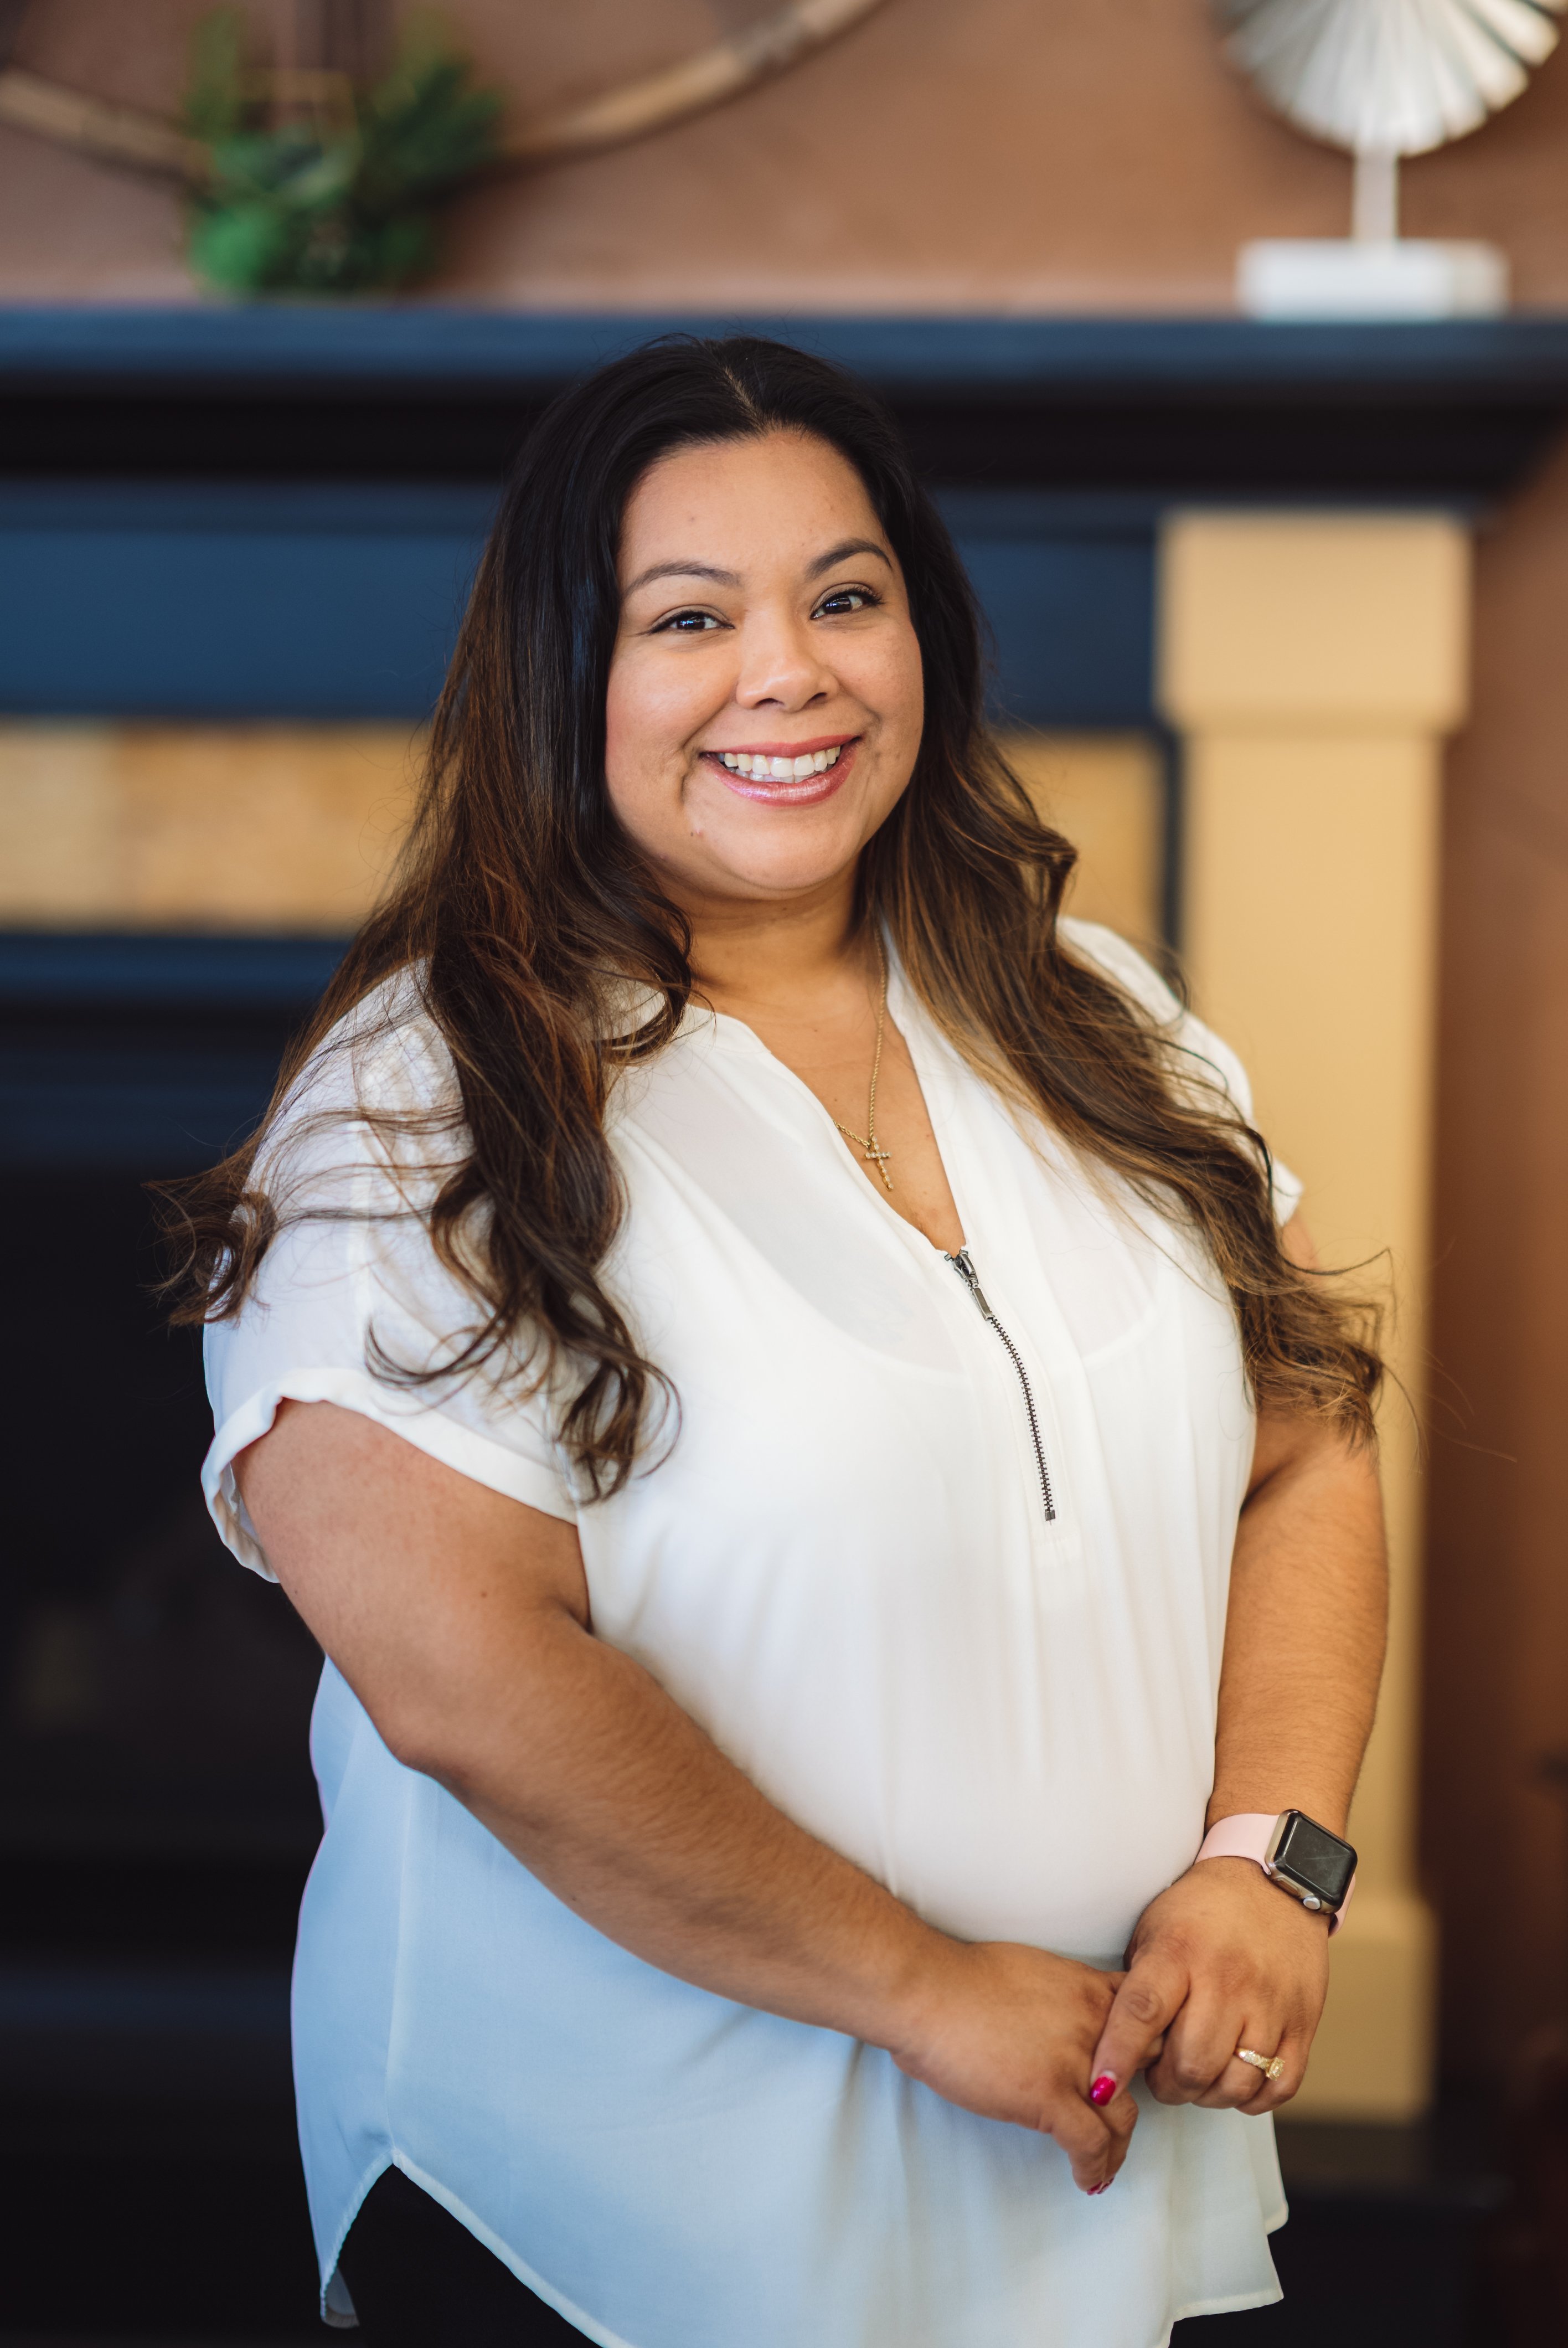 Julia is one of our full-time sales associates and has been with our company for 7 years. If you have a home remodeling project, she will help transform your ideas into reality. She thrives on making sure all jobs are done to perfection and works hard to